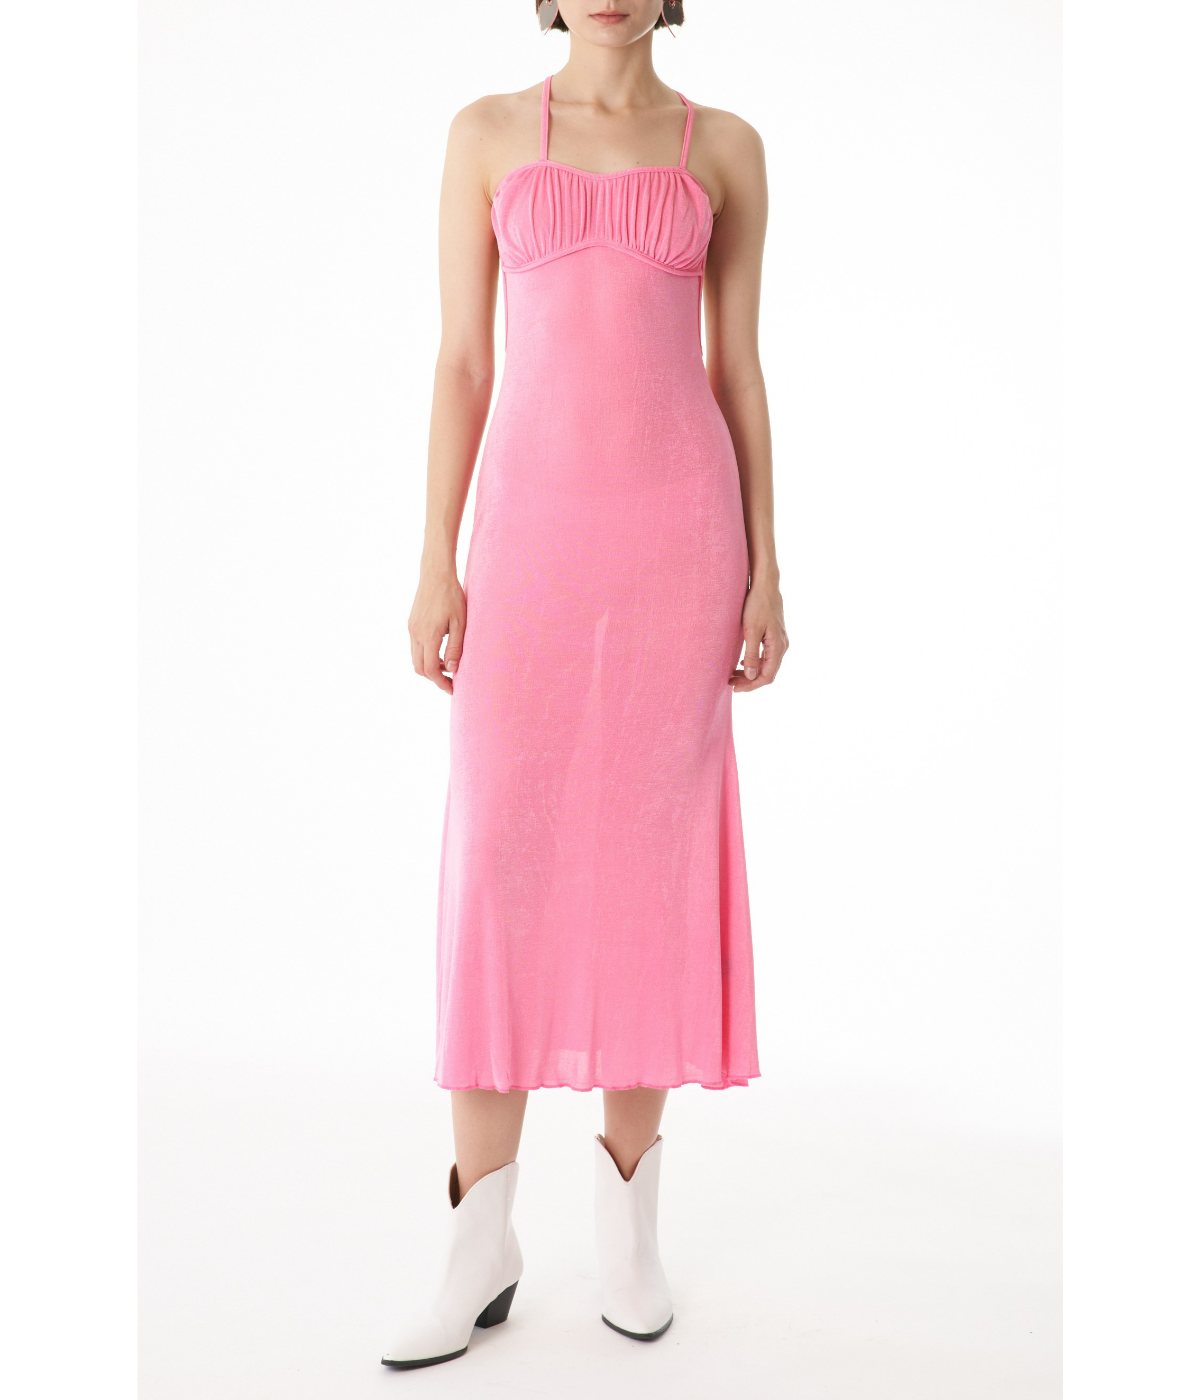 Ese Pink Dress with a Sweetheart Neckline Empire Waist and Adjustable Straps Midi Dress Pink